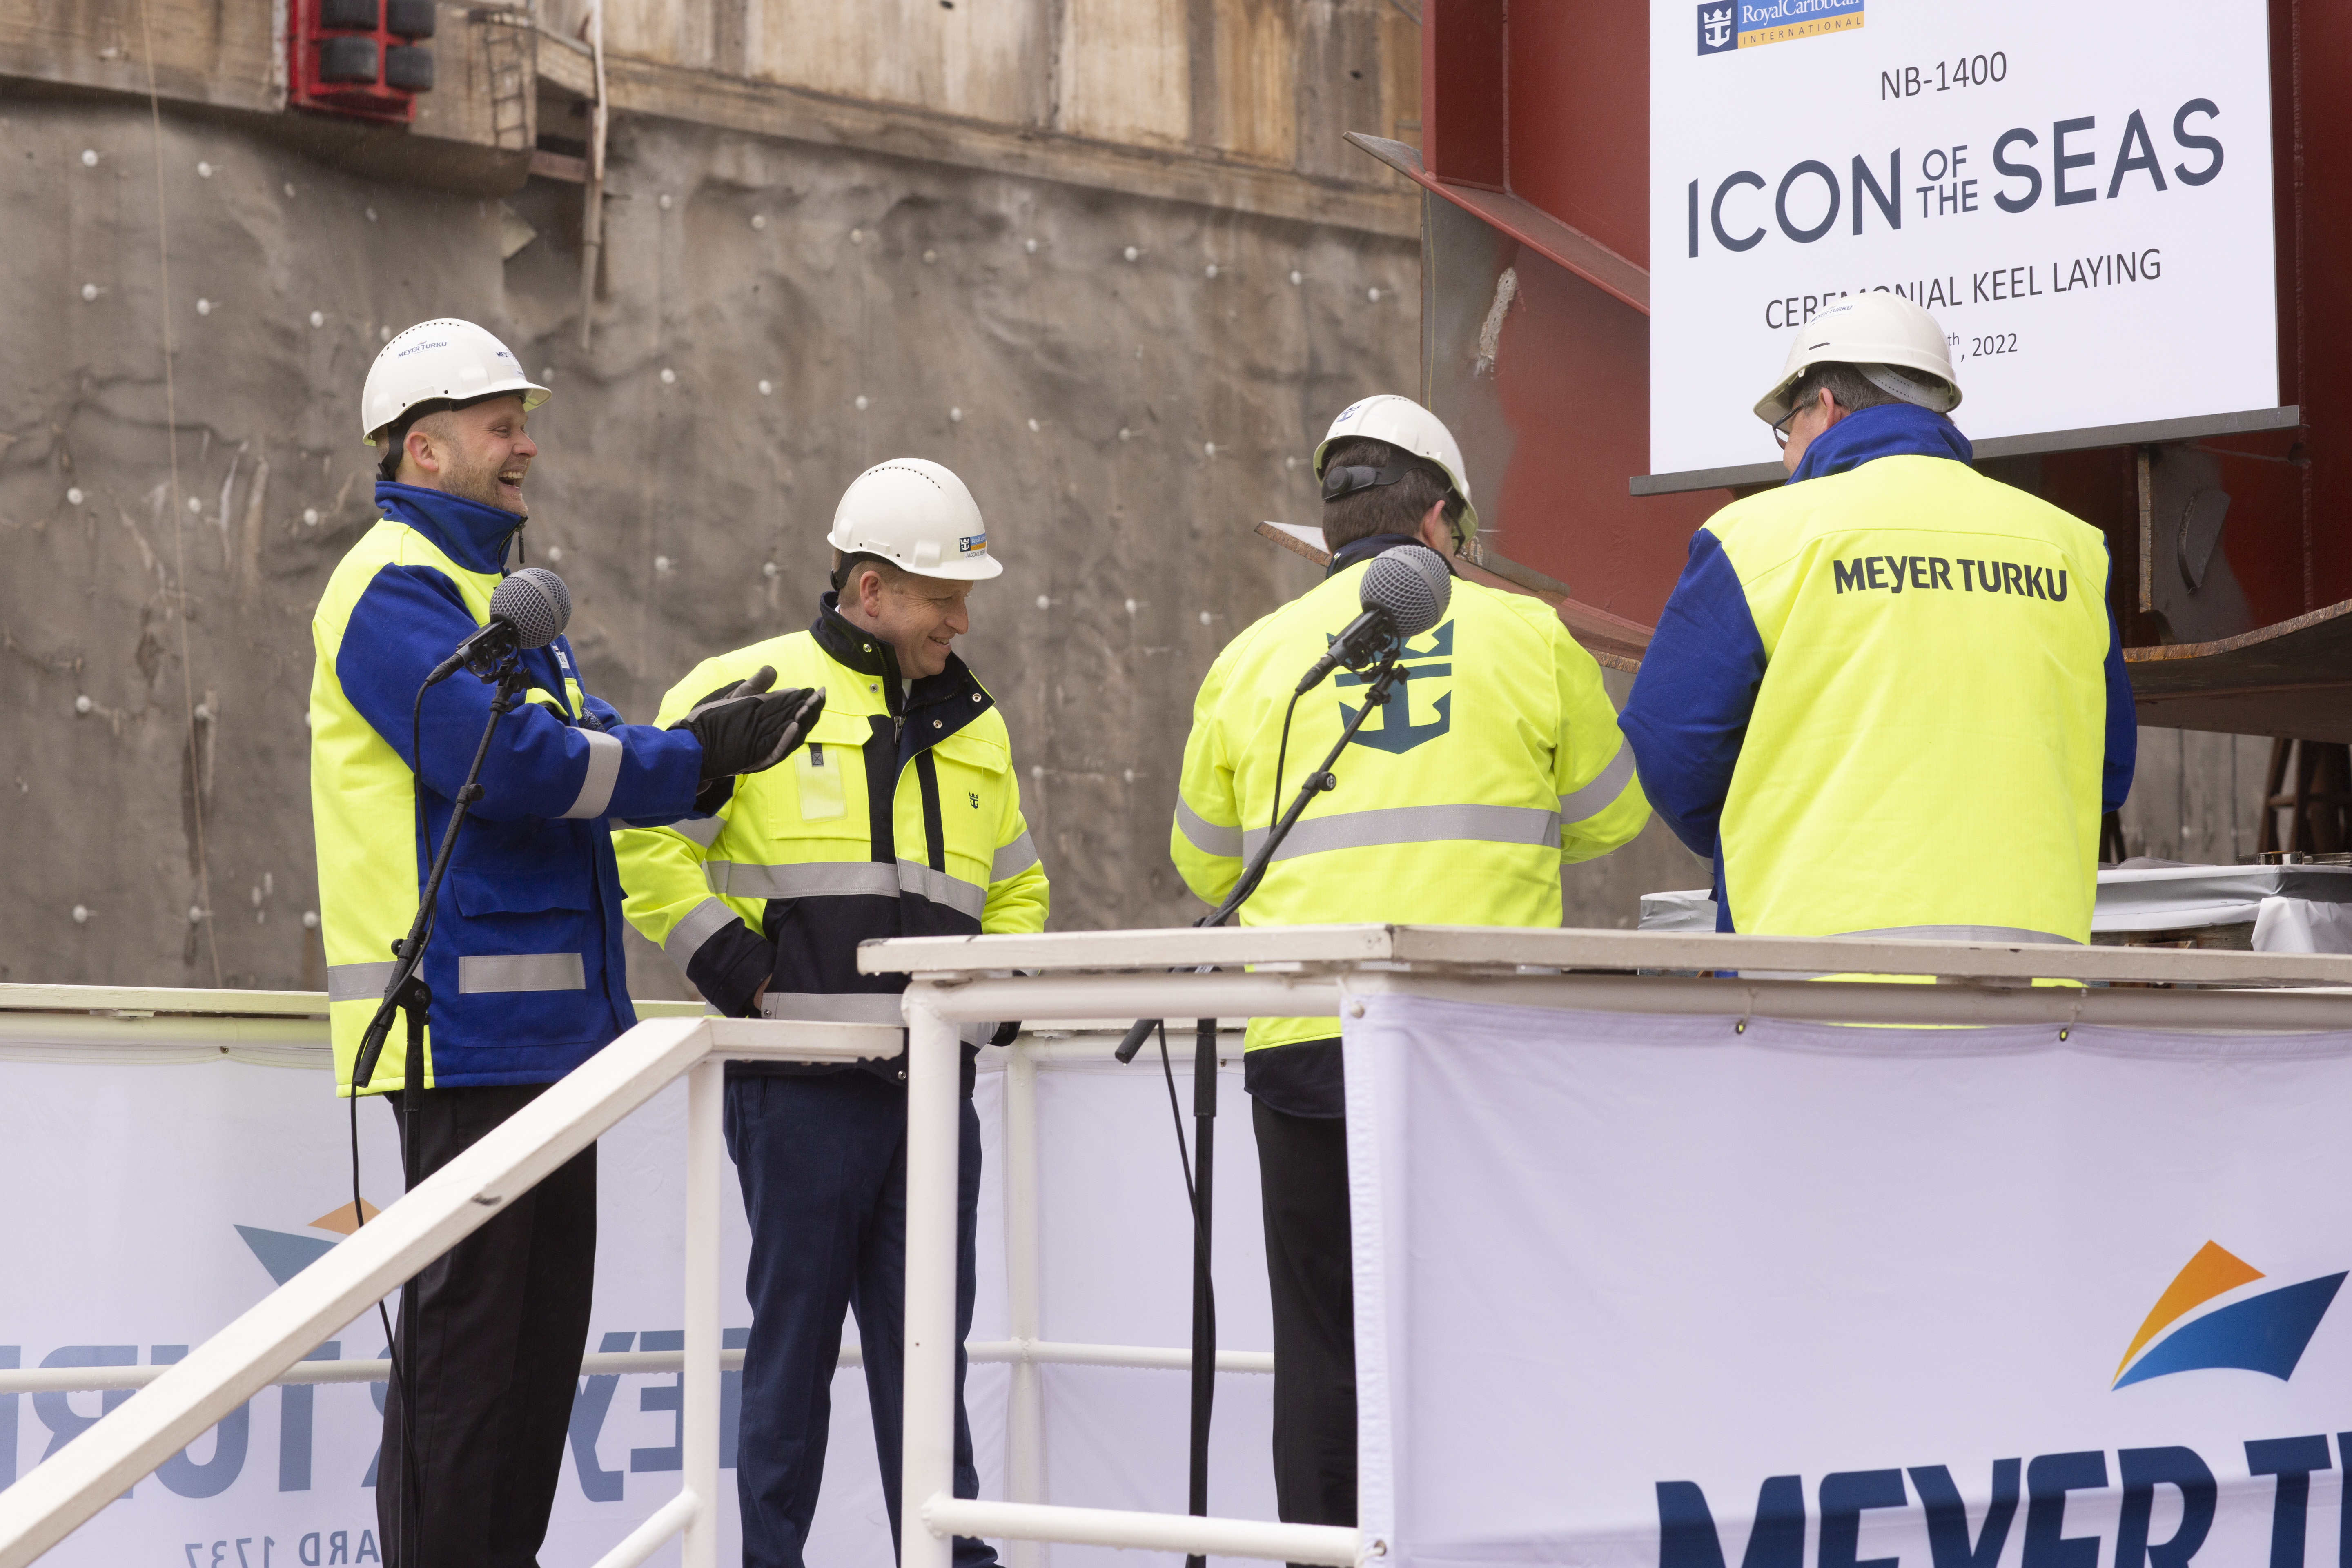 Construction on Royal Caribbean International’s highly anticipated Icon of the Seas reached a new milestone. A keel-laying ceremony took place at Finnish shipyard Meyer Turku to celebrate the progress on the revolutionary cruise ship (April 2022)